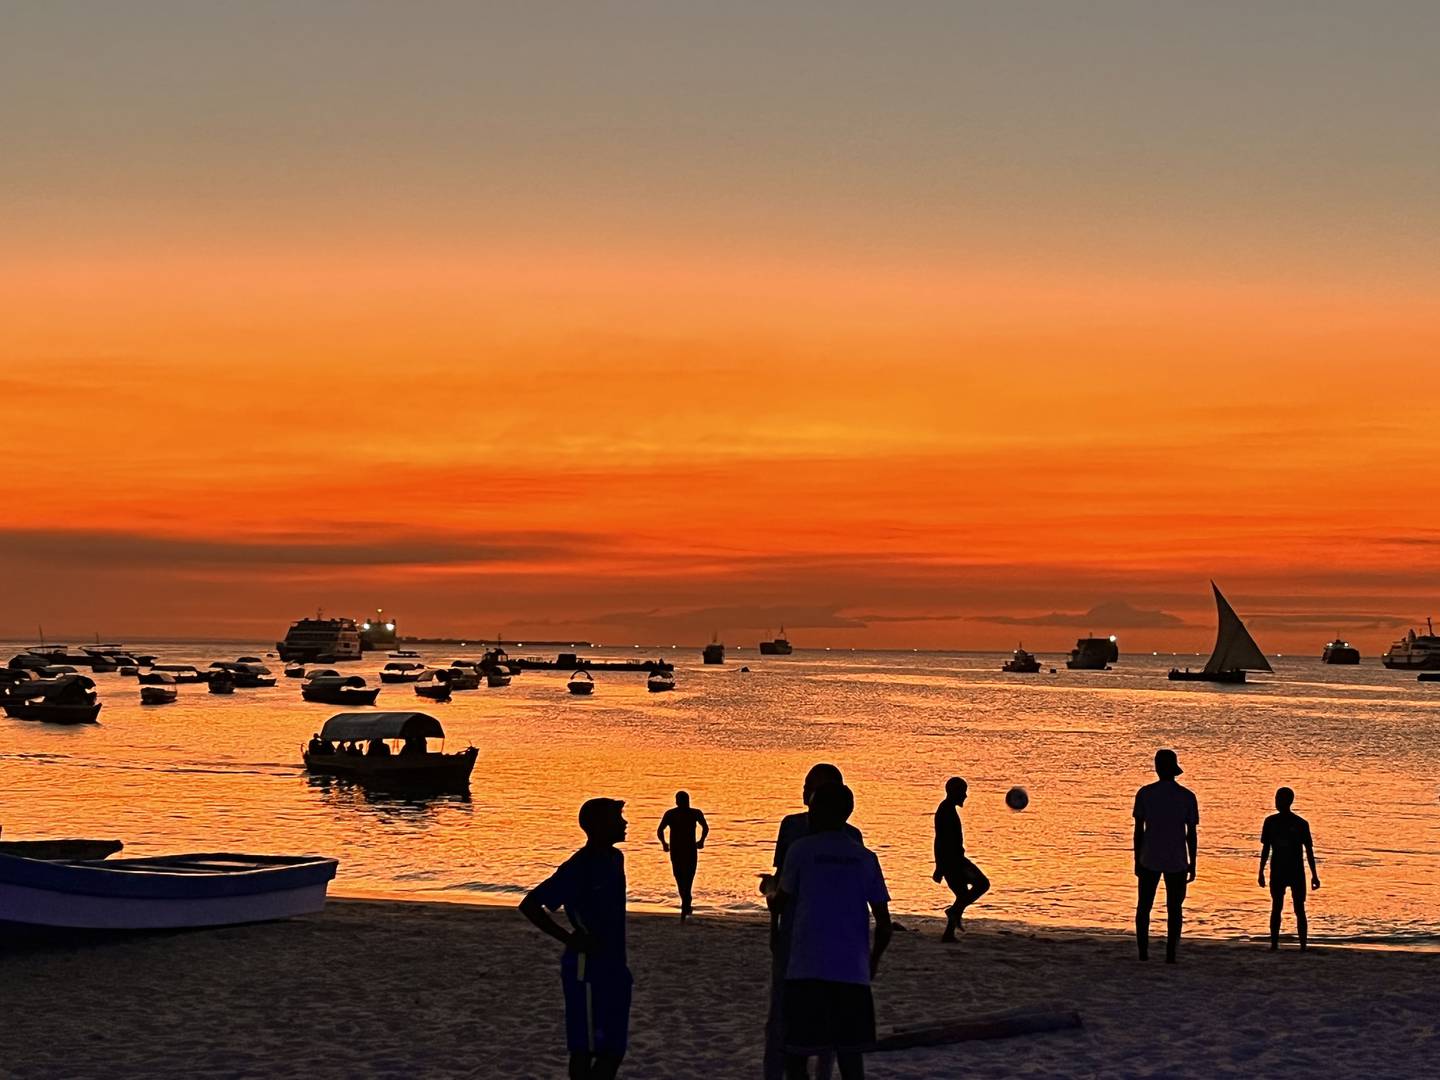 A Zanzibar sunset with a dhow under sail. Trading dhows plied routes between the UAE and Zanzibar. Photo: Tim Power